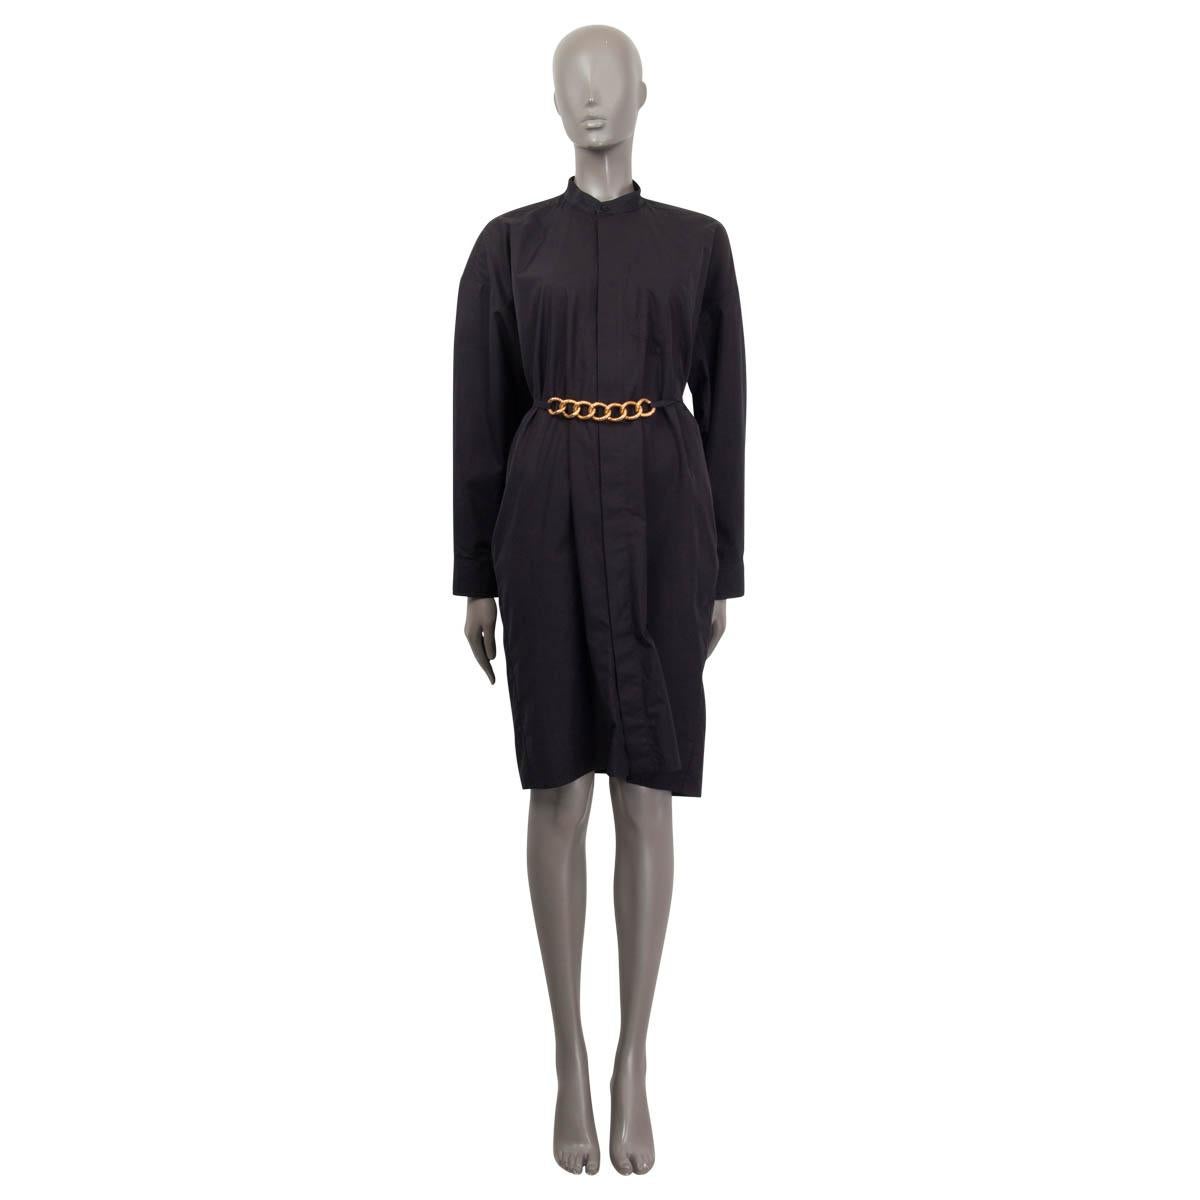 100% authentic Givenchy shirt dress in black cotton (100%). Features a chain-link detailed belt with a gold-tone hardware and a stand up collar. Has two side slit pockets and buttoned cuffs. Opens with nine buttons on the front. Unlined. Has been